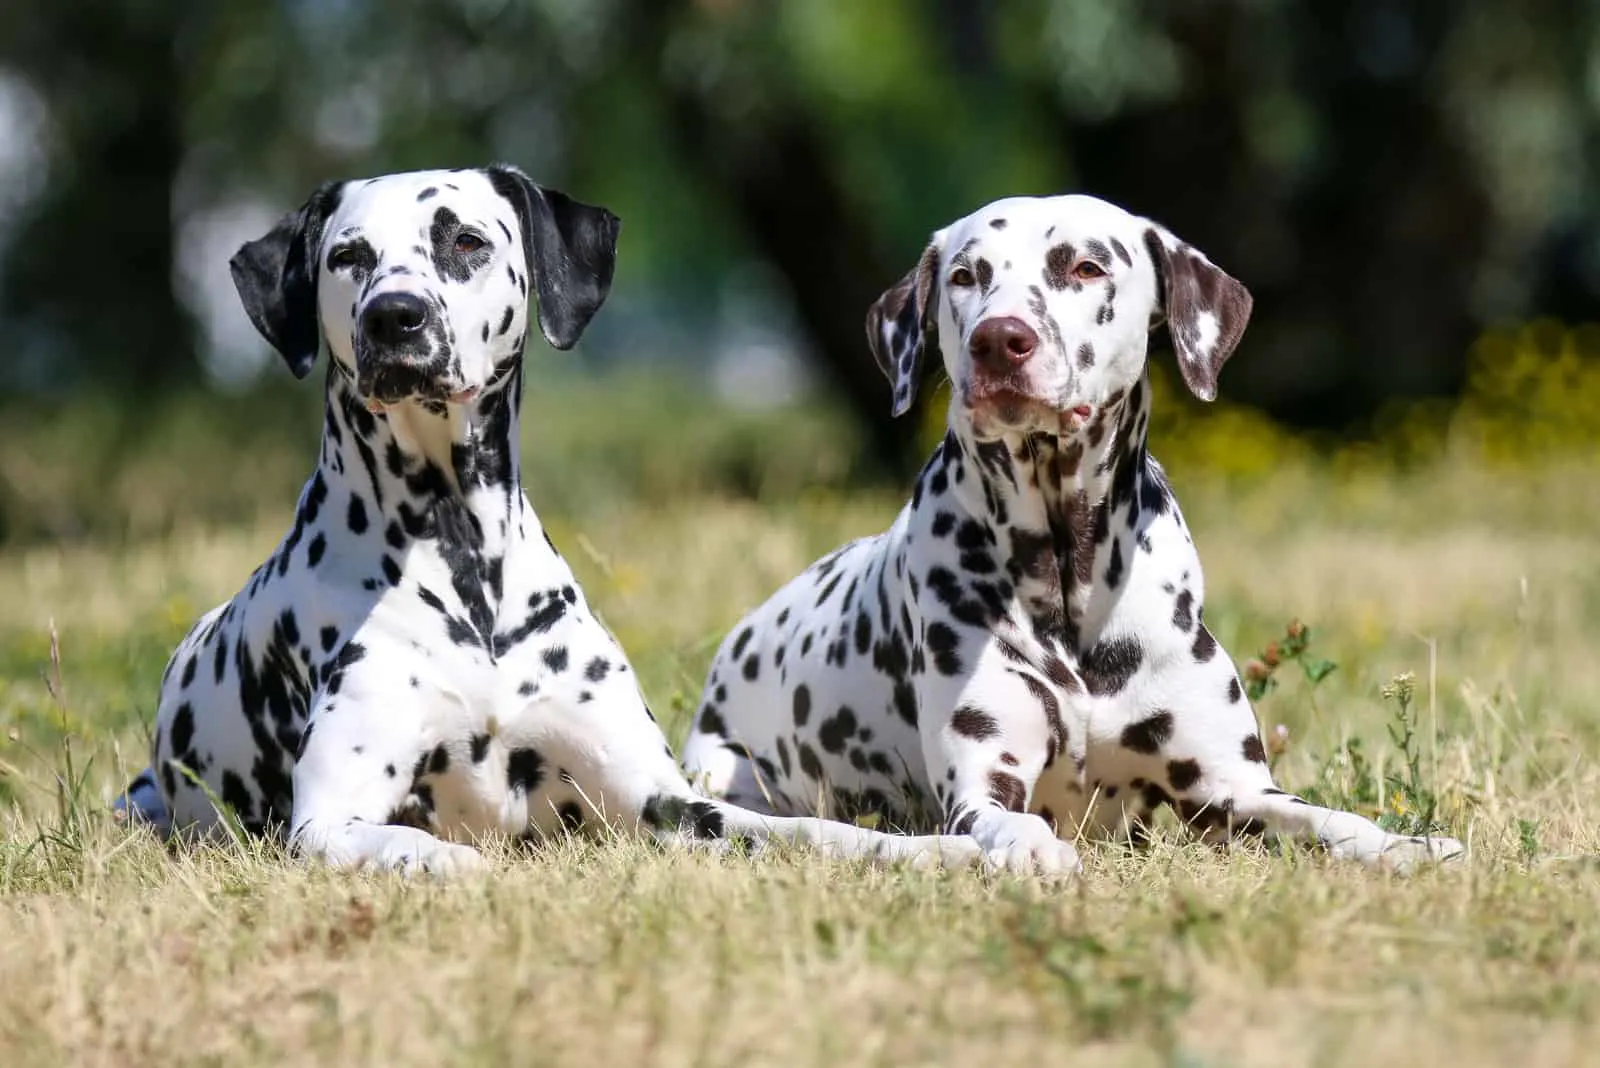  two cute dalmatian dogs with black and brown spots